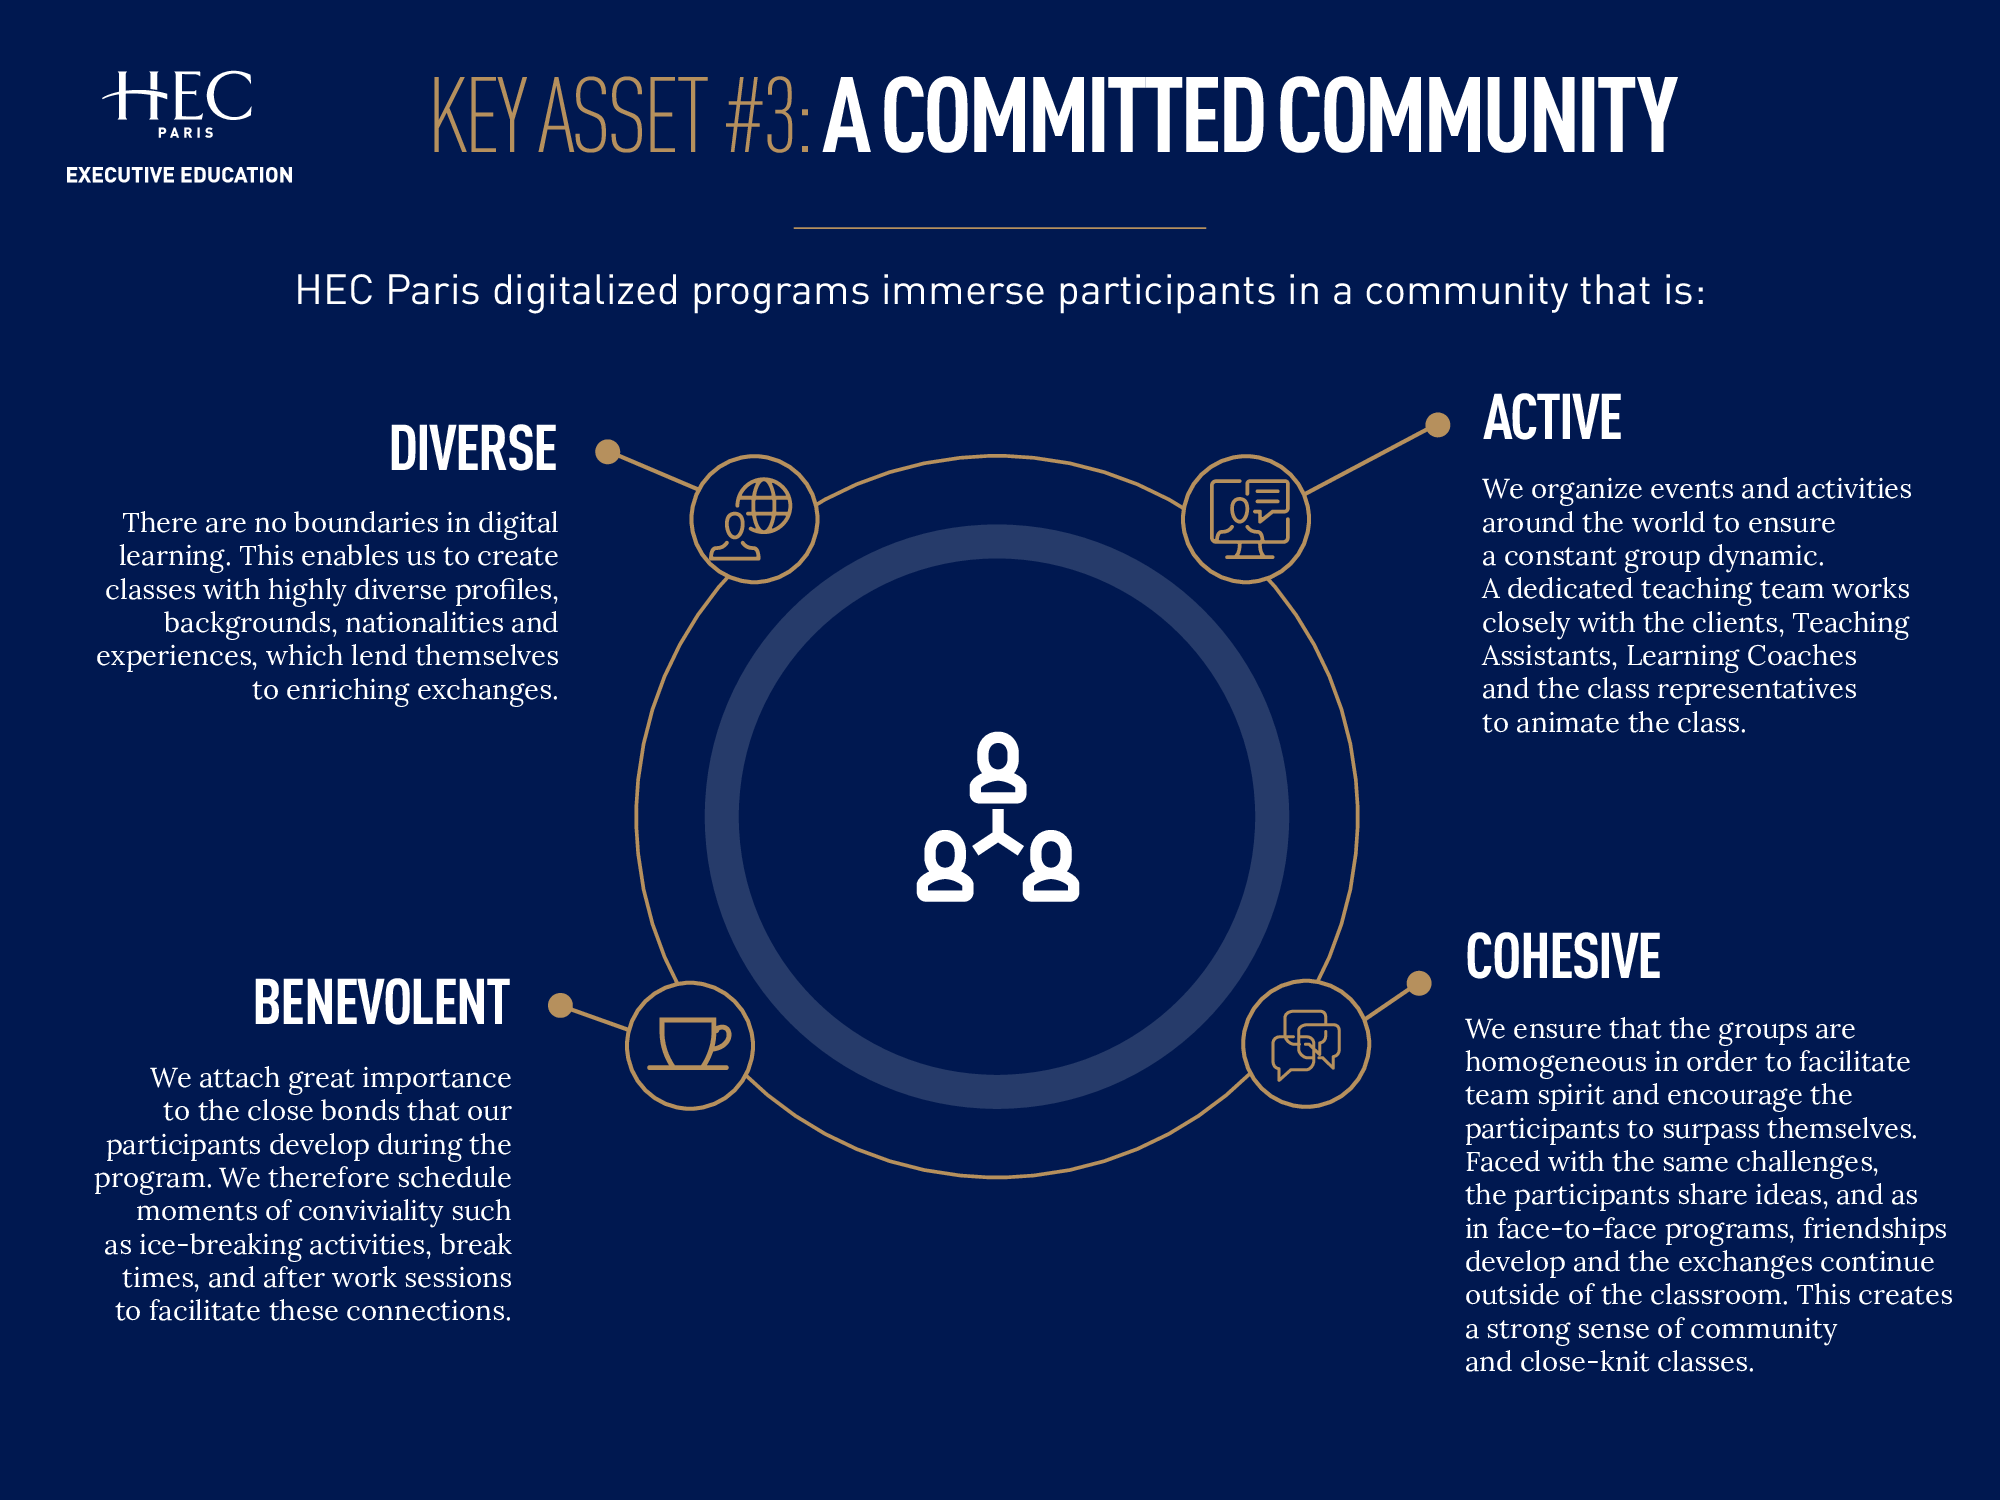 File presenting the third key asset committed community